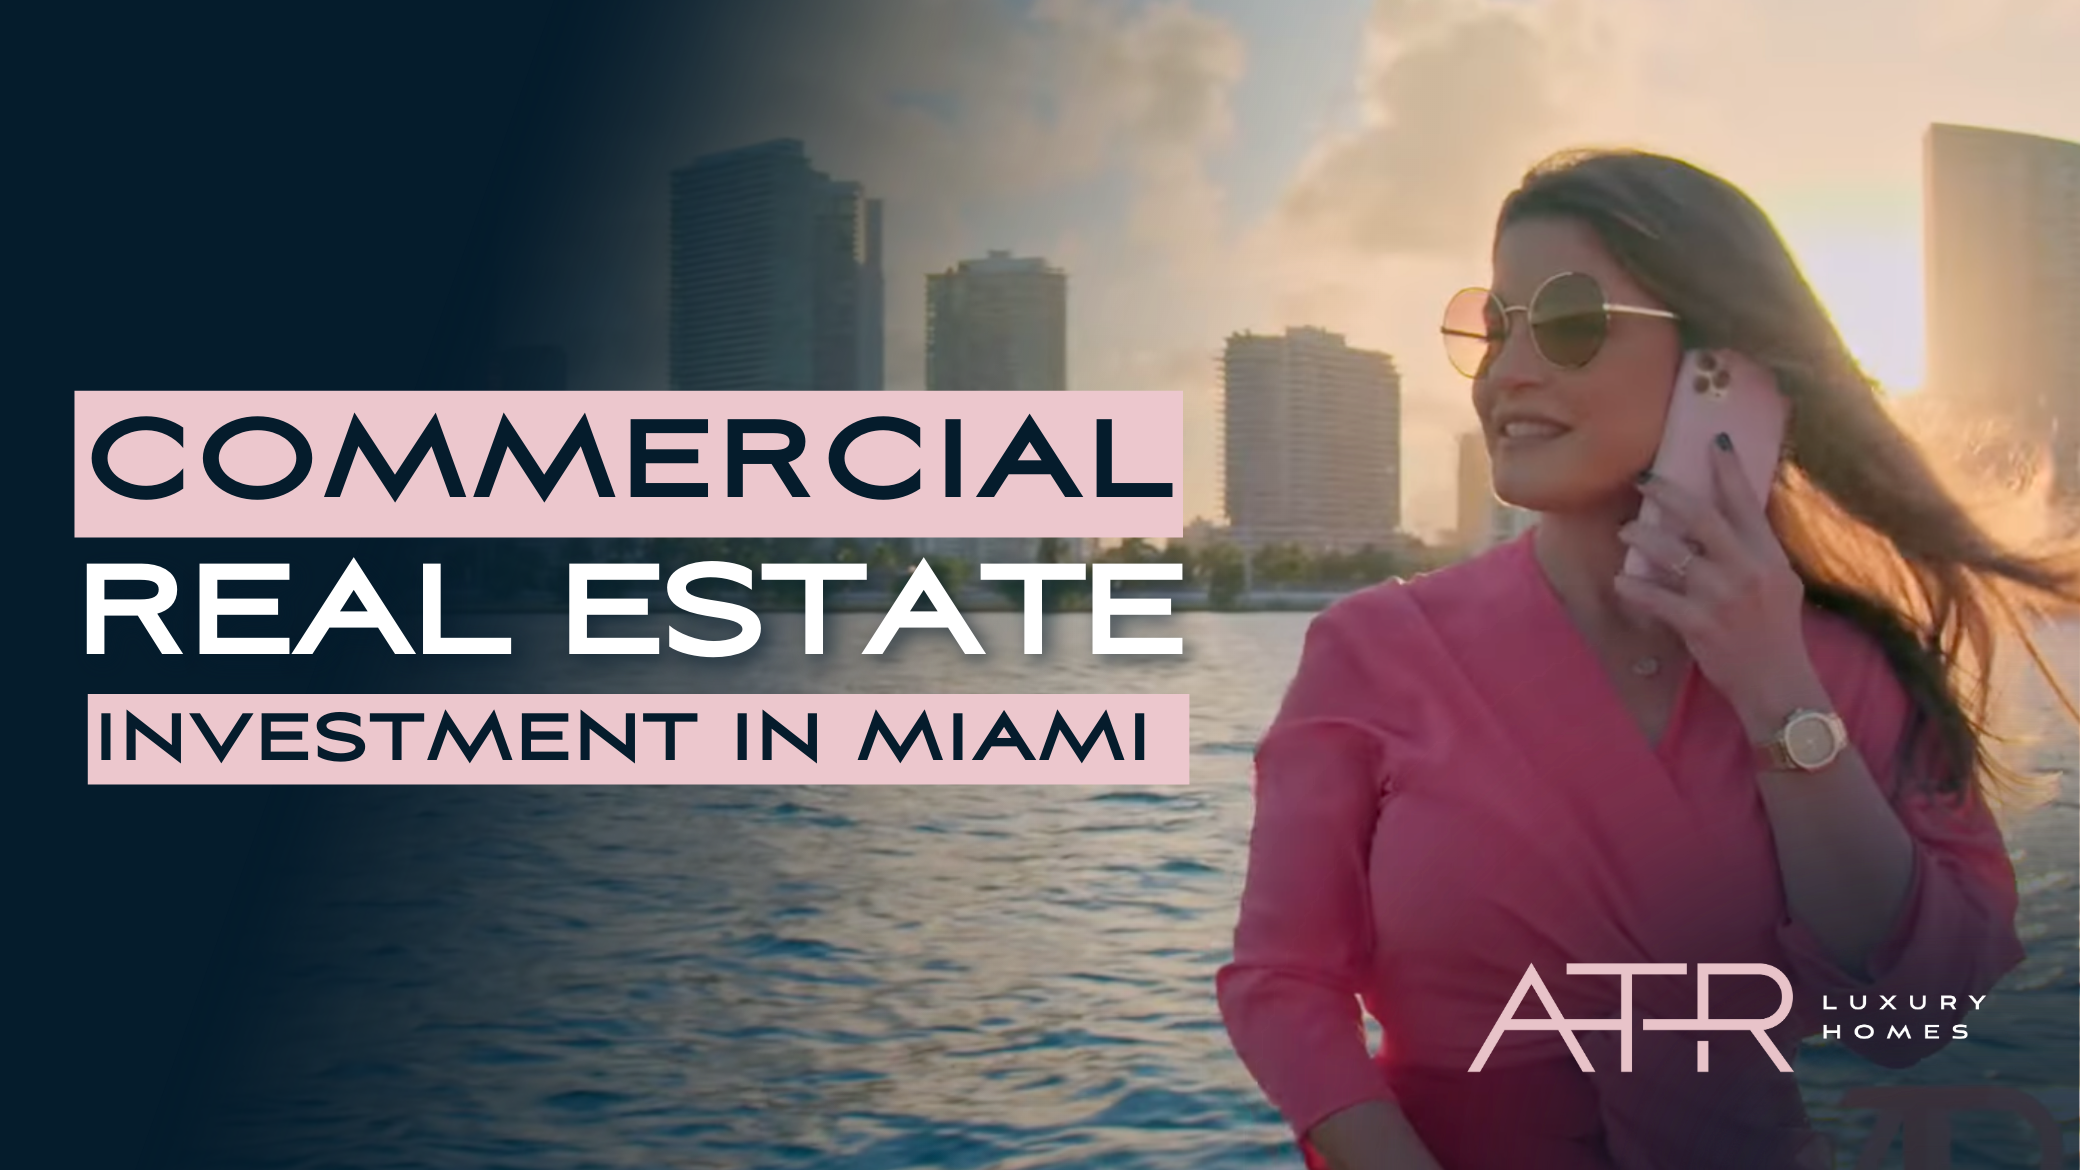 Miami, one of the best cities for commercial real estate opportunities!